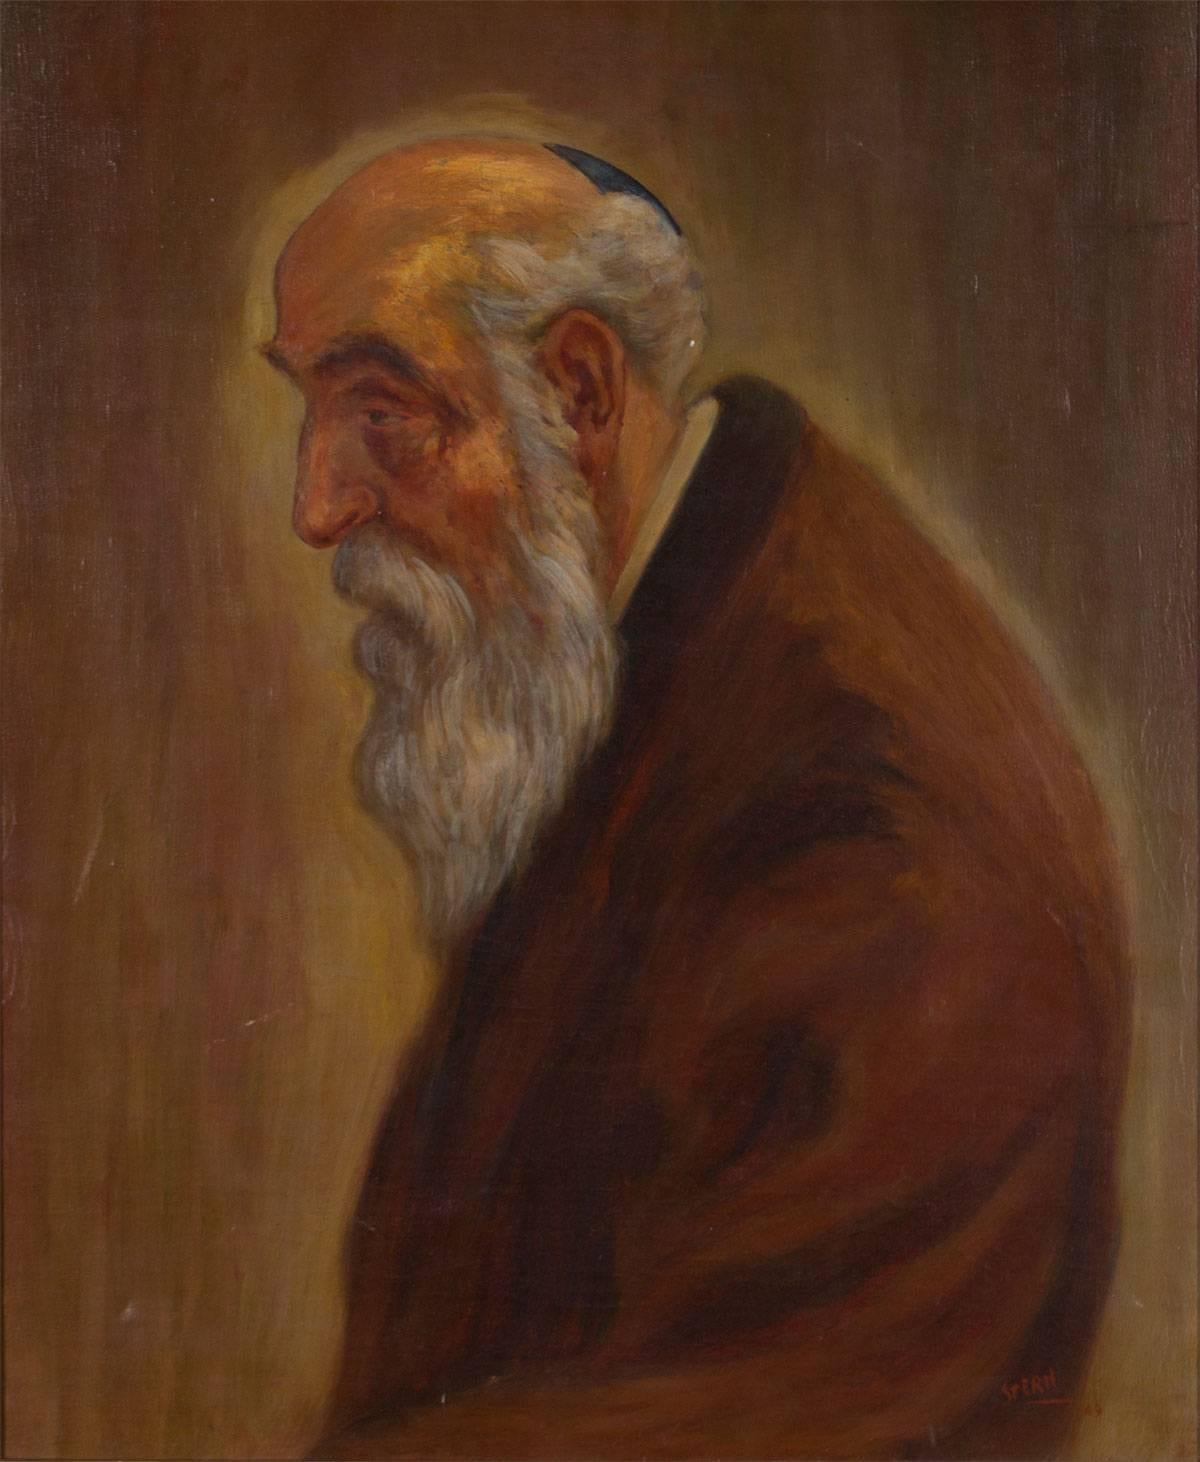 Vieillesse, French Portrait of an Elderly Jewish Man - Modern Painting by Unknown